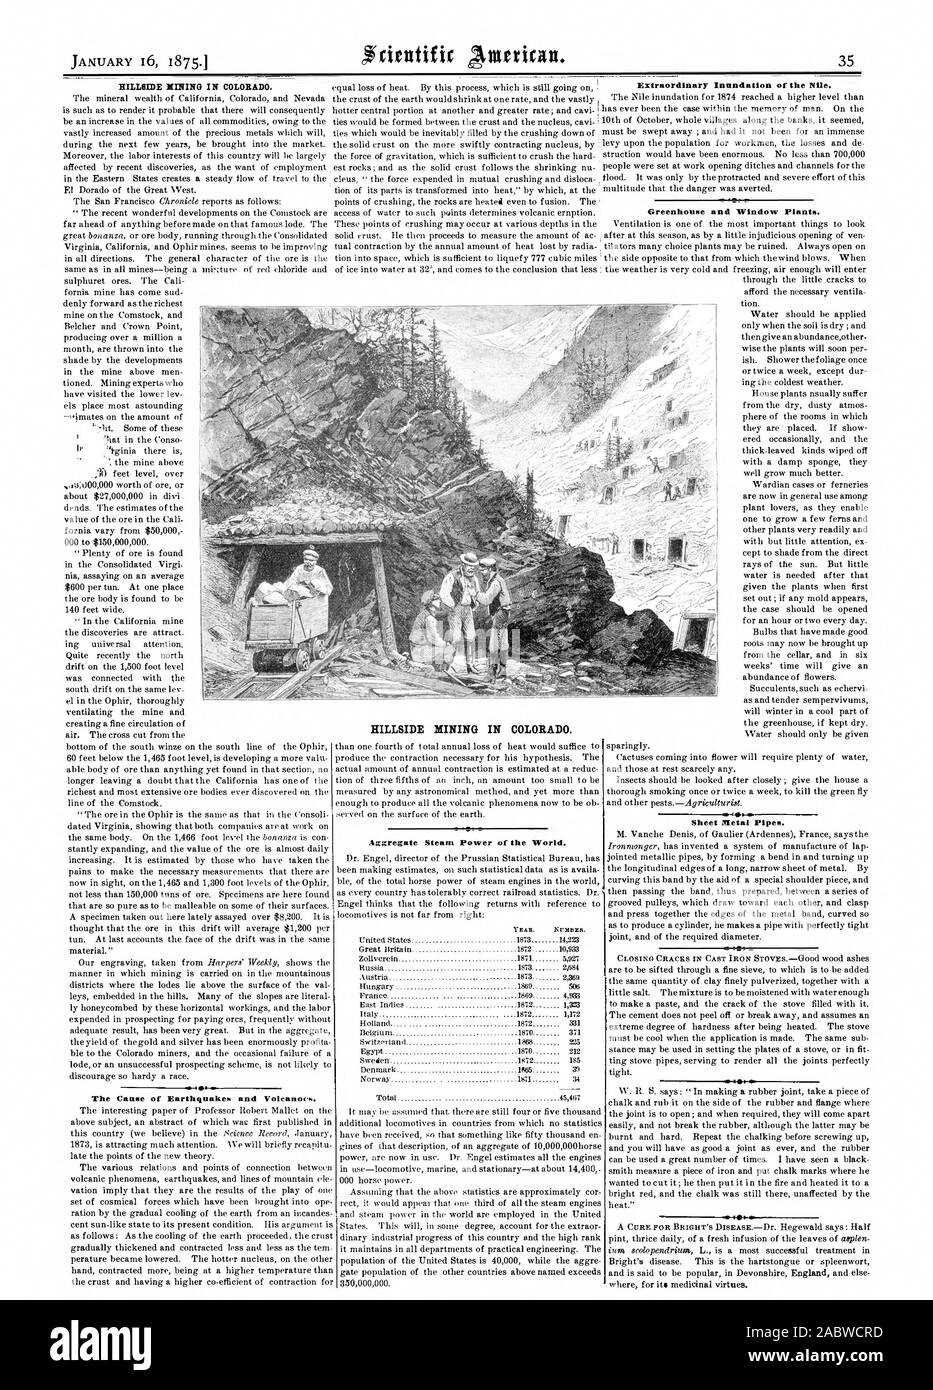 HILLSIDE MINING IN COLORADO. HILLSIDE MINING IN COLORADO. Aggregate Steam Power of the World. Greenhouse and Window Plants. Sheet Metal Pipes. Extraordinary Inundation of the Nile. The Cause of Earthquakes and Volcanoes. YEAH. NEMBER., scientific american, 1875-01-16 Stock Photo